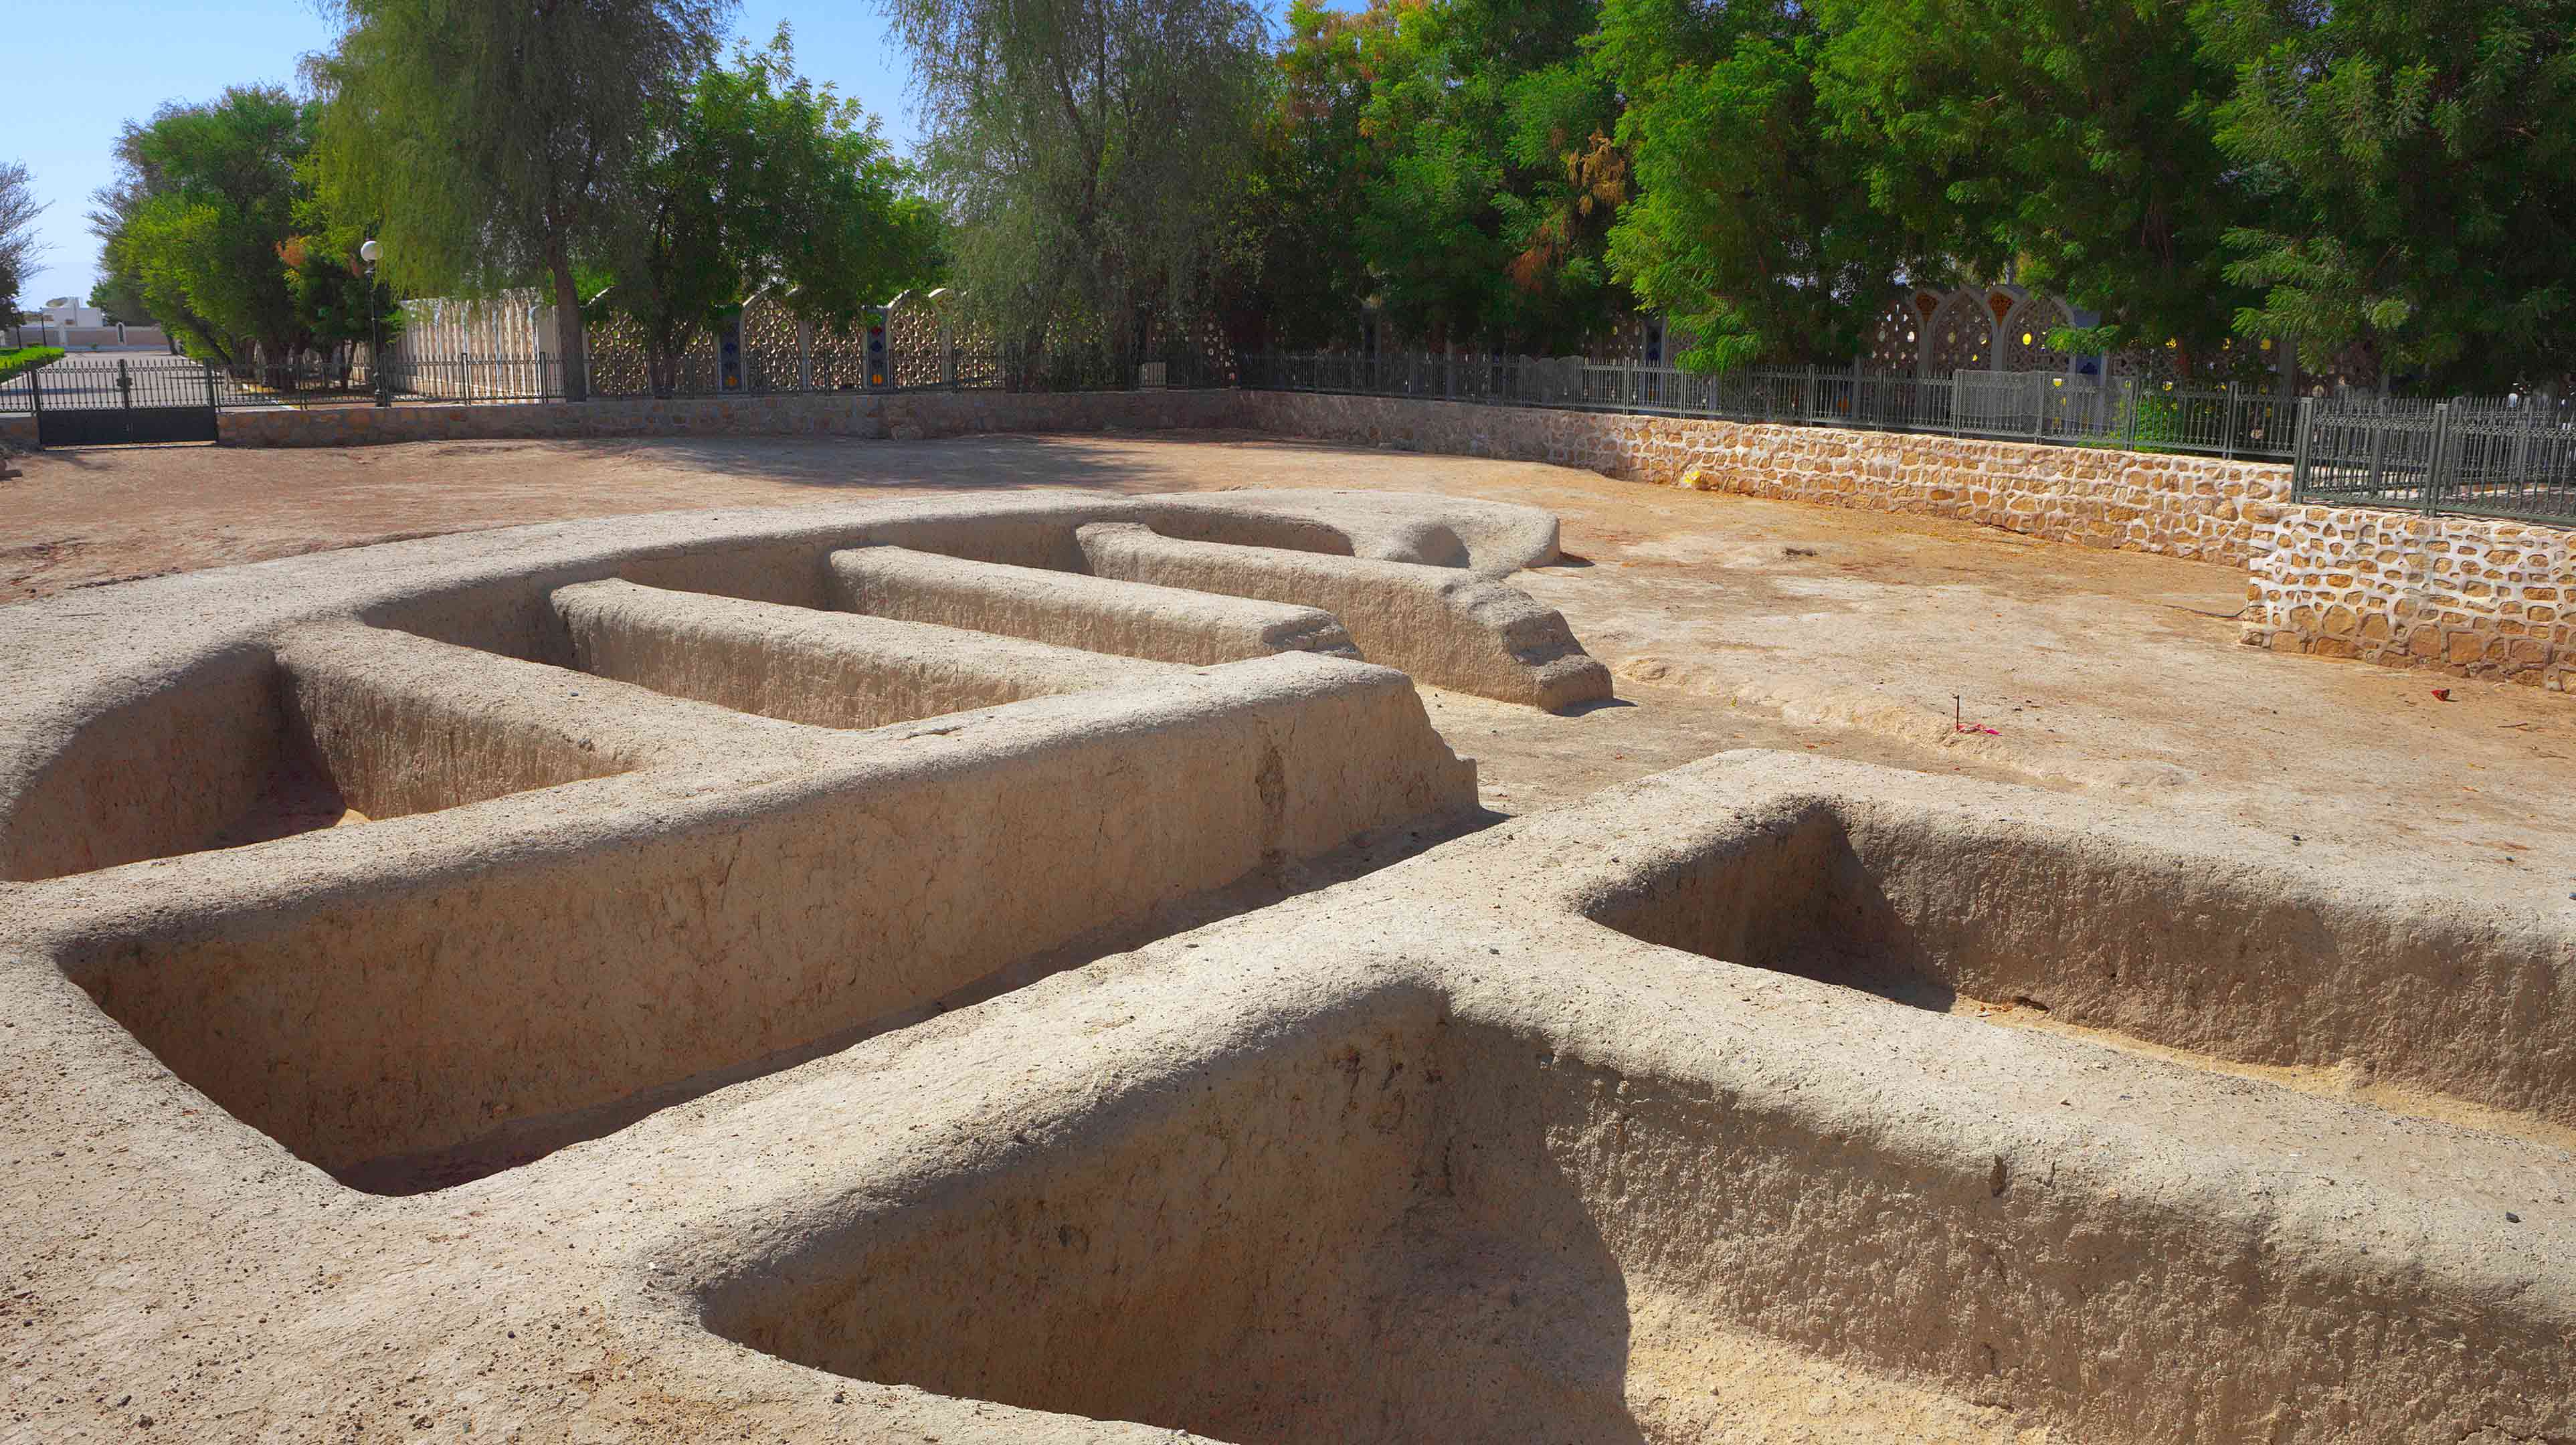 Hili Archaeological Park, one of the UNESCO World Heritage sites in Abu Dhabi